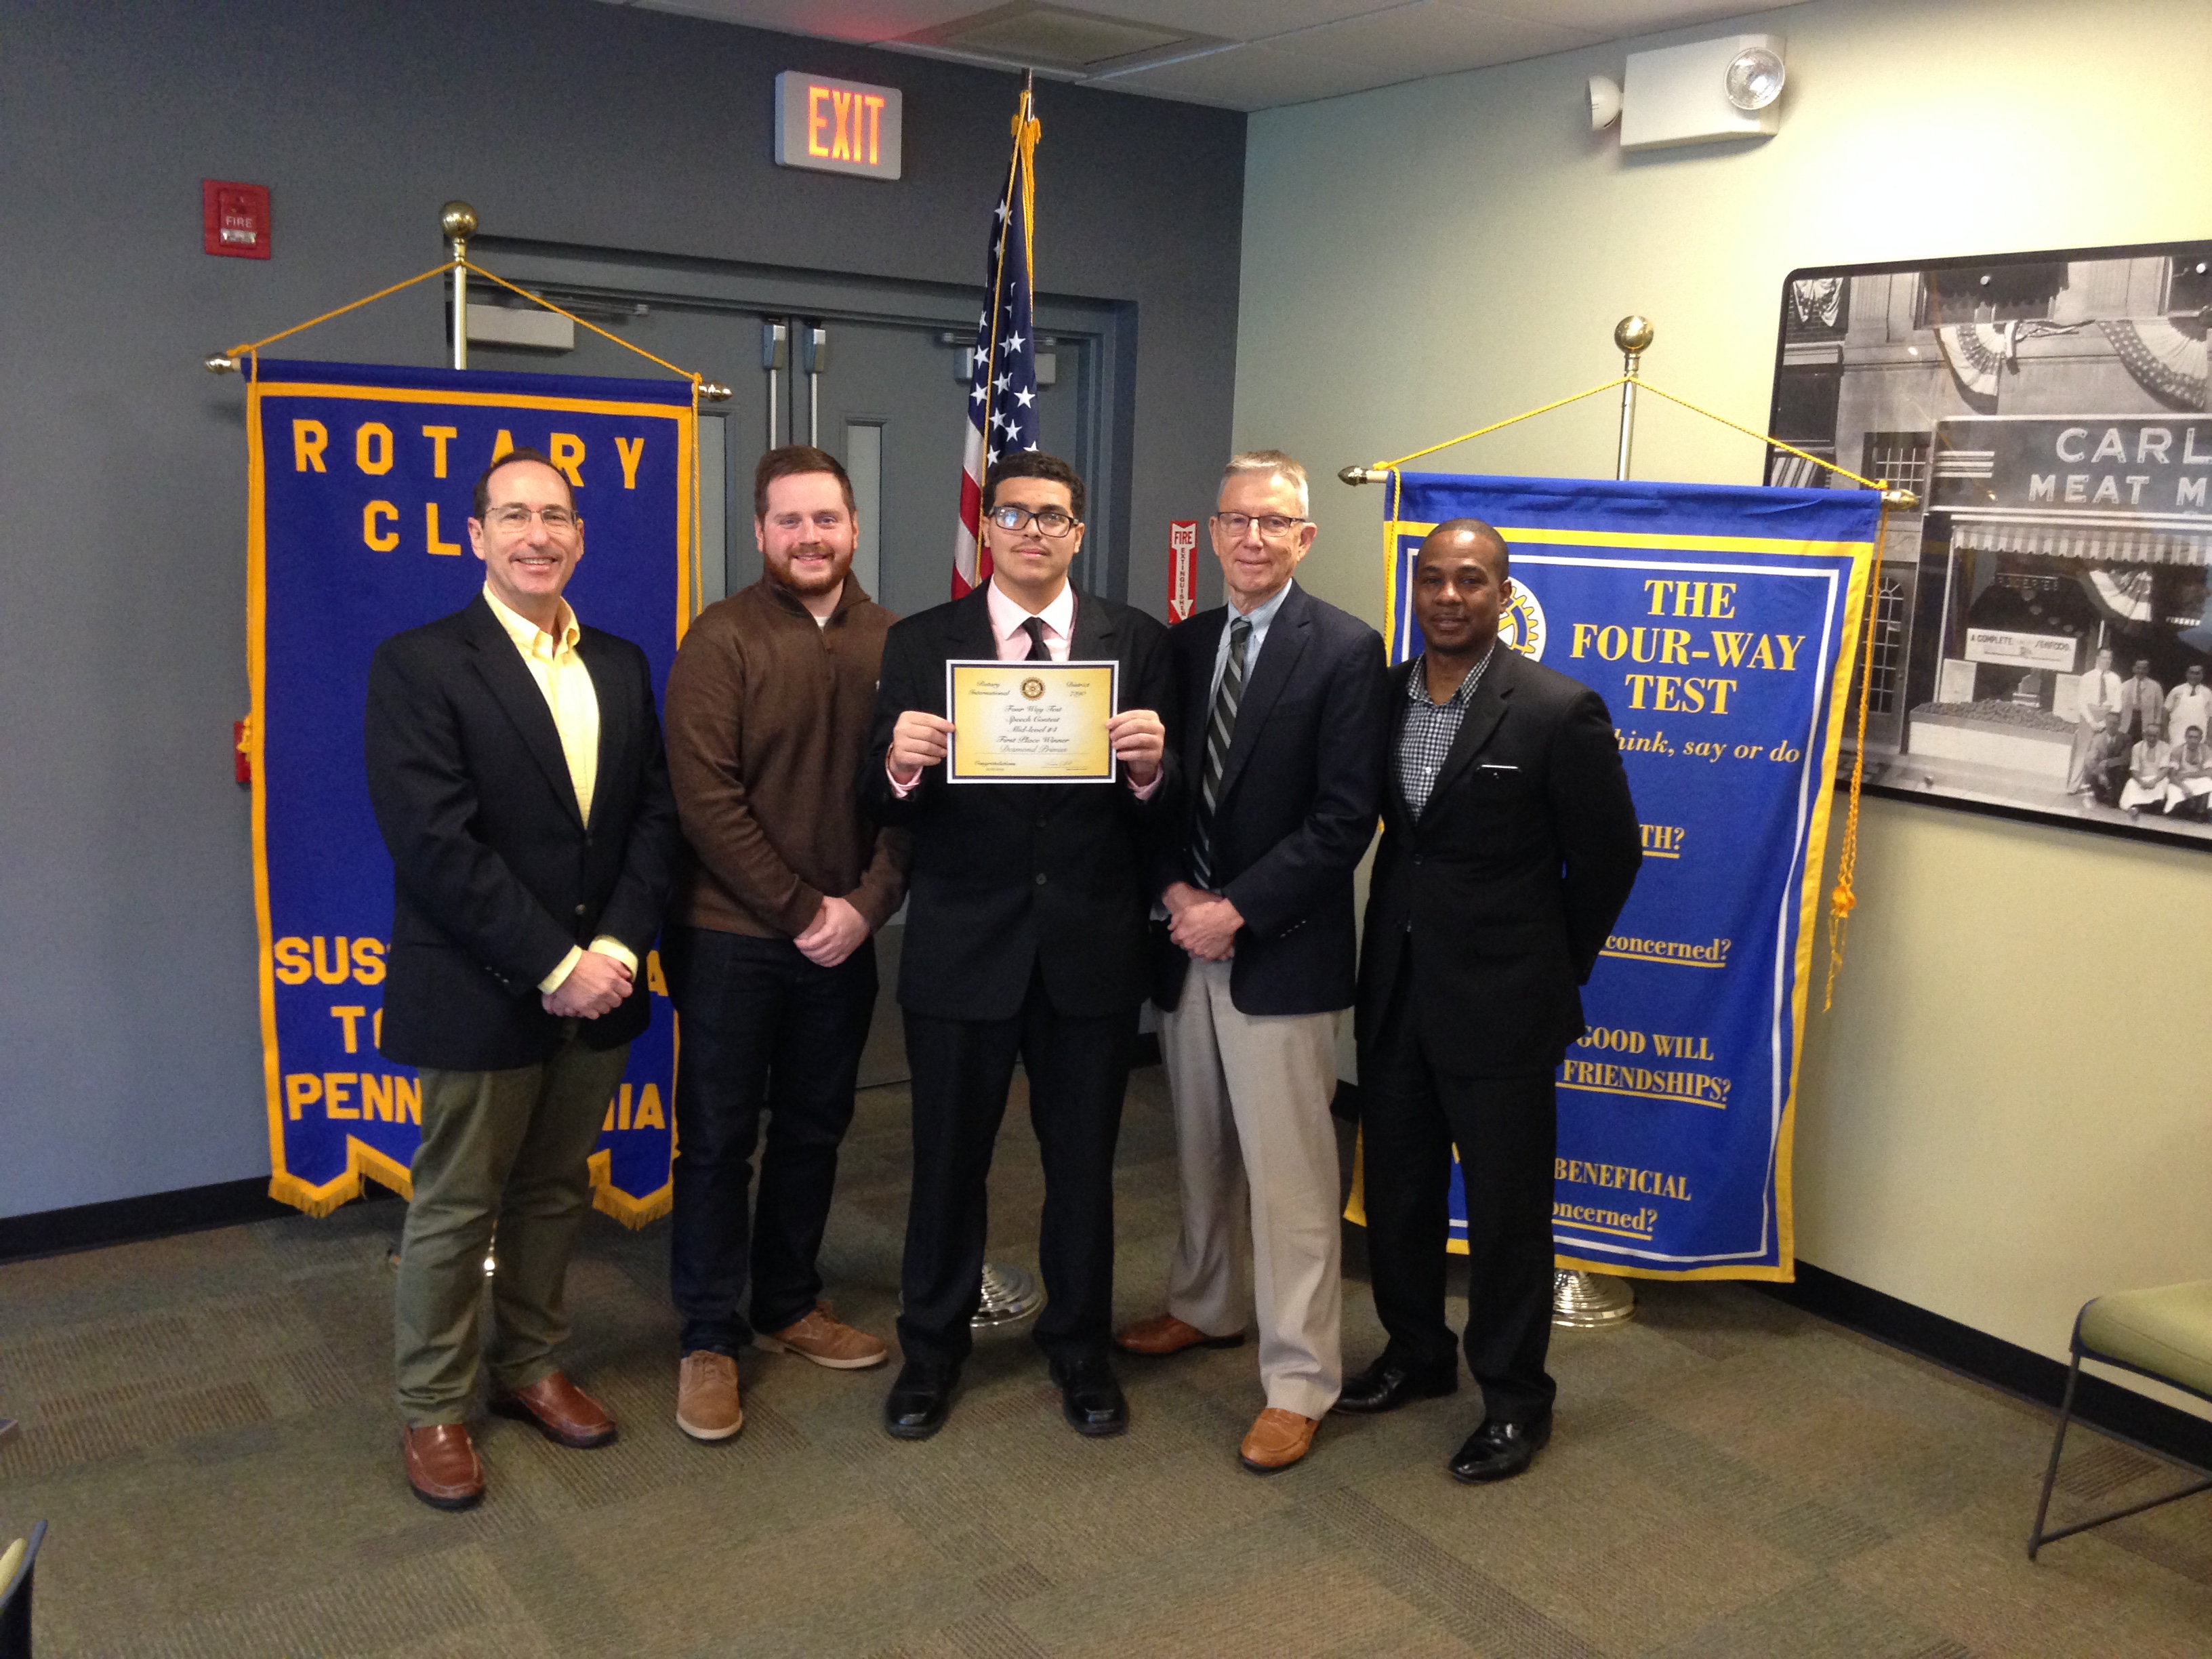 MHS students competed in mid-level round of Rotary Four-Way Speech Contest